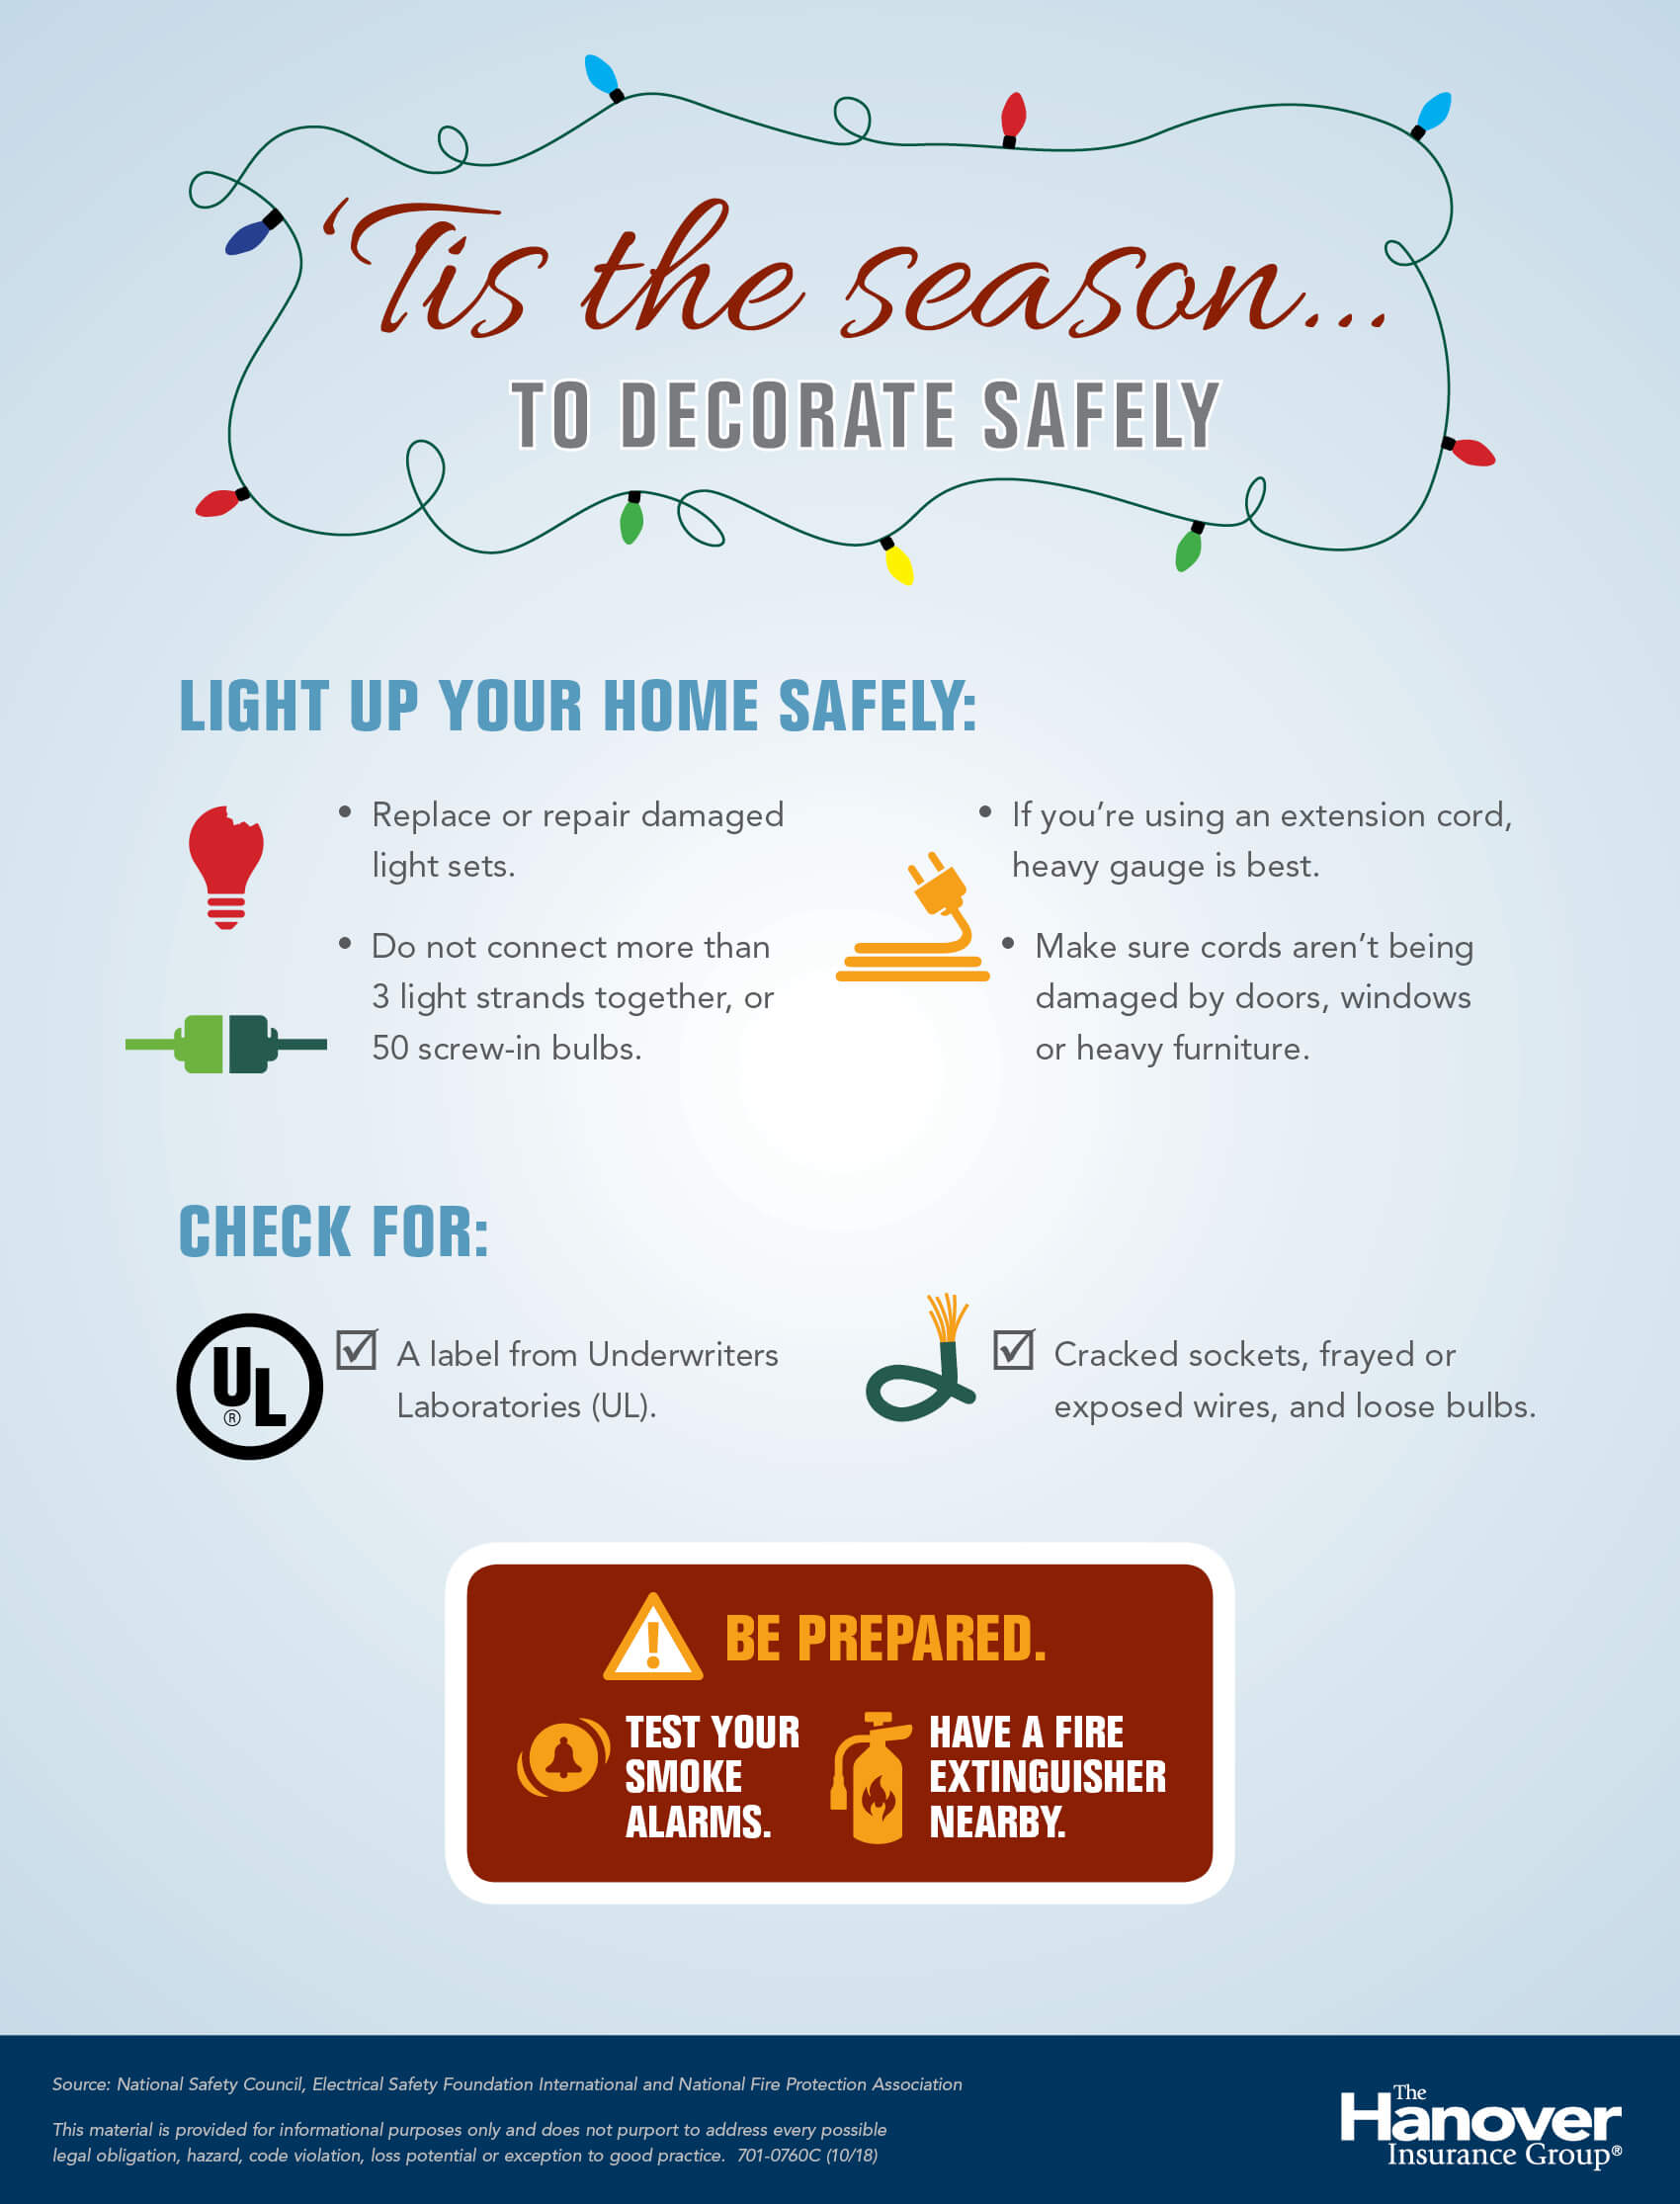 Safety tips for lighting your home for the holidays